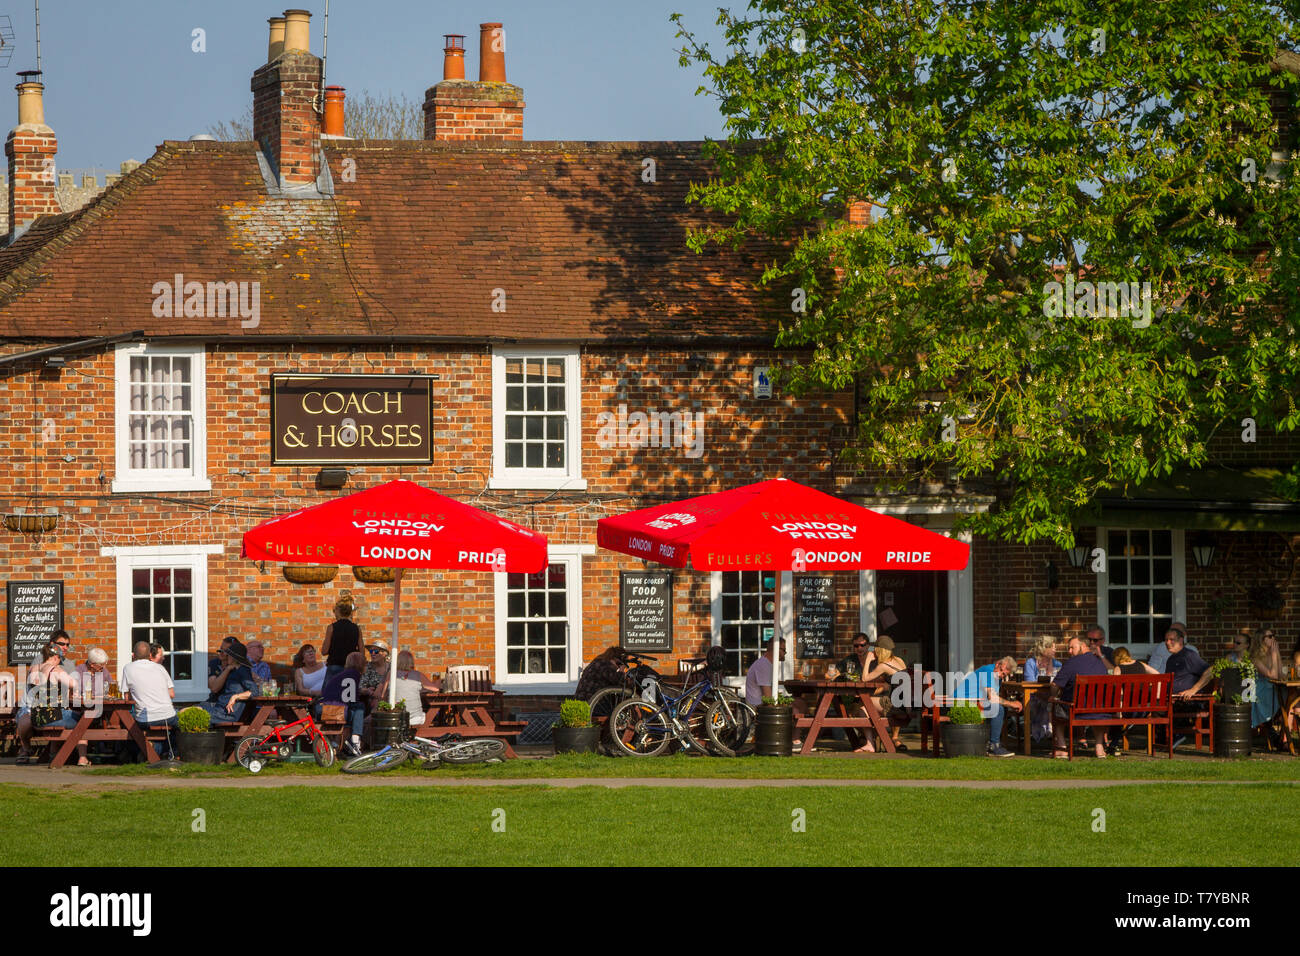 People relax in the evening sun under bright red sunshades outside the Coach and Horses pub by the Kinecroft, Wallingford by a Horse Chestnut tree Stock Photo